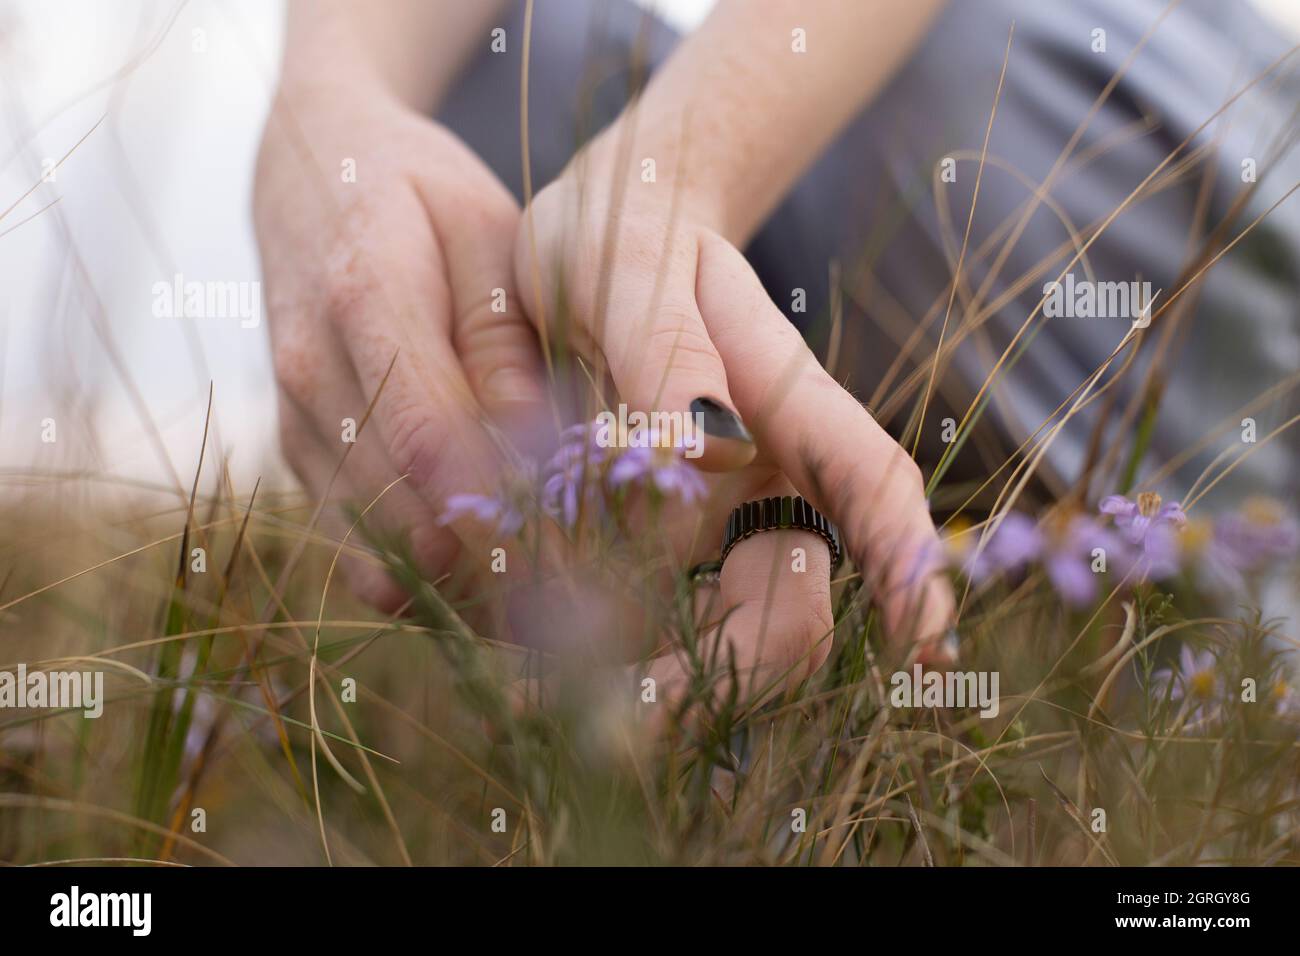 Crop of freckles hands and violet wildflowers Stock Photo